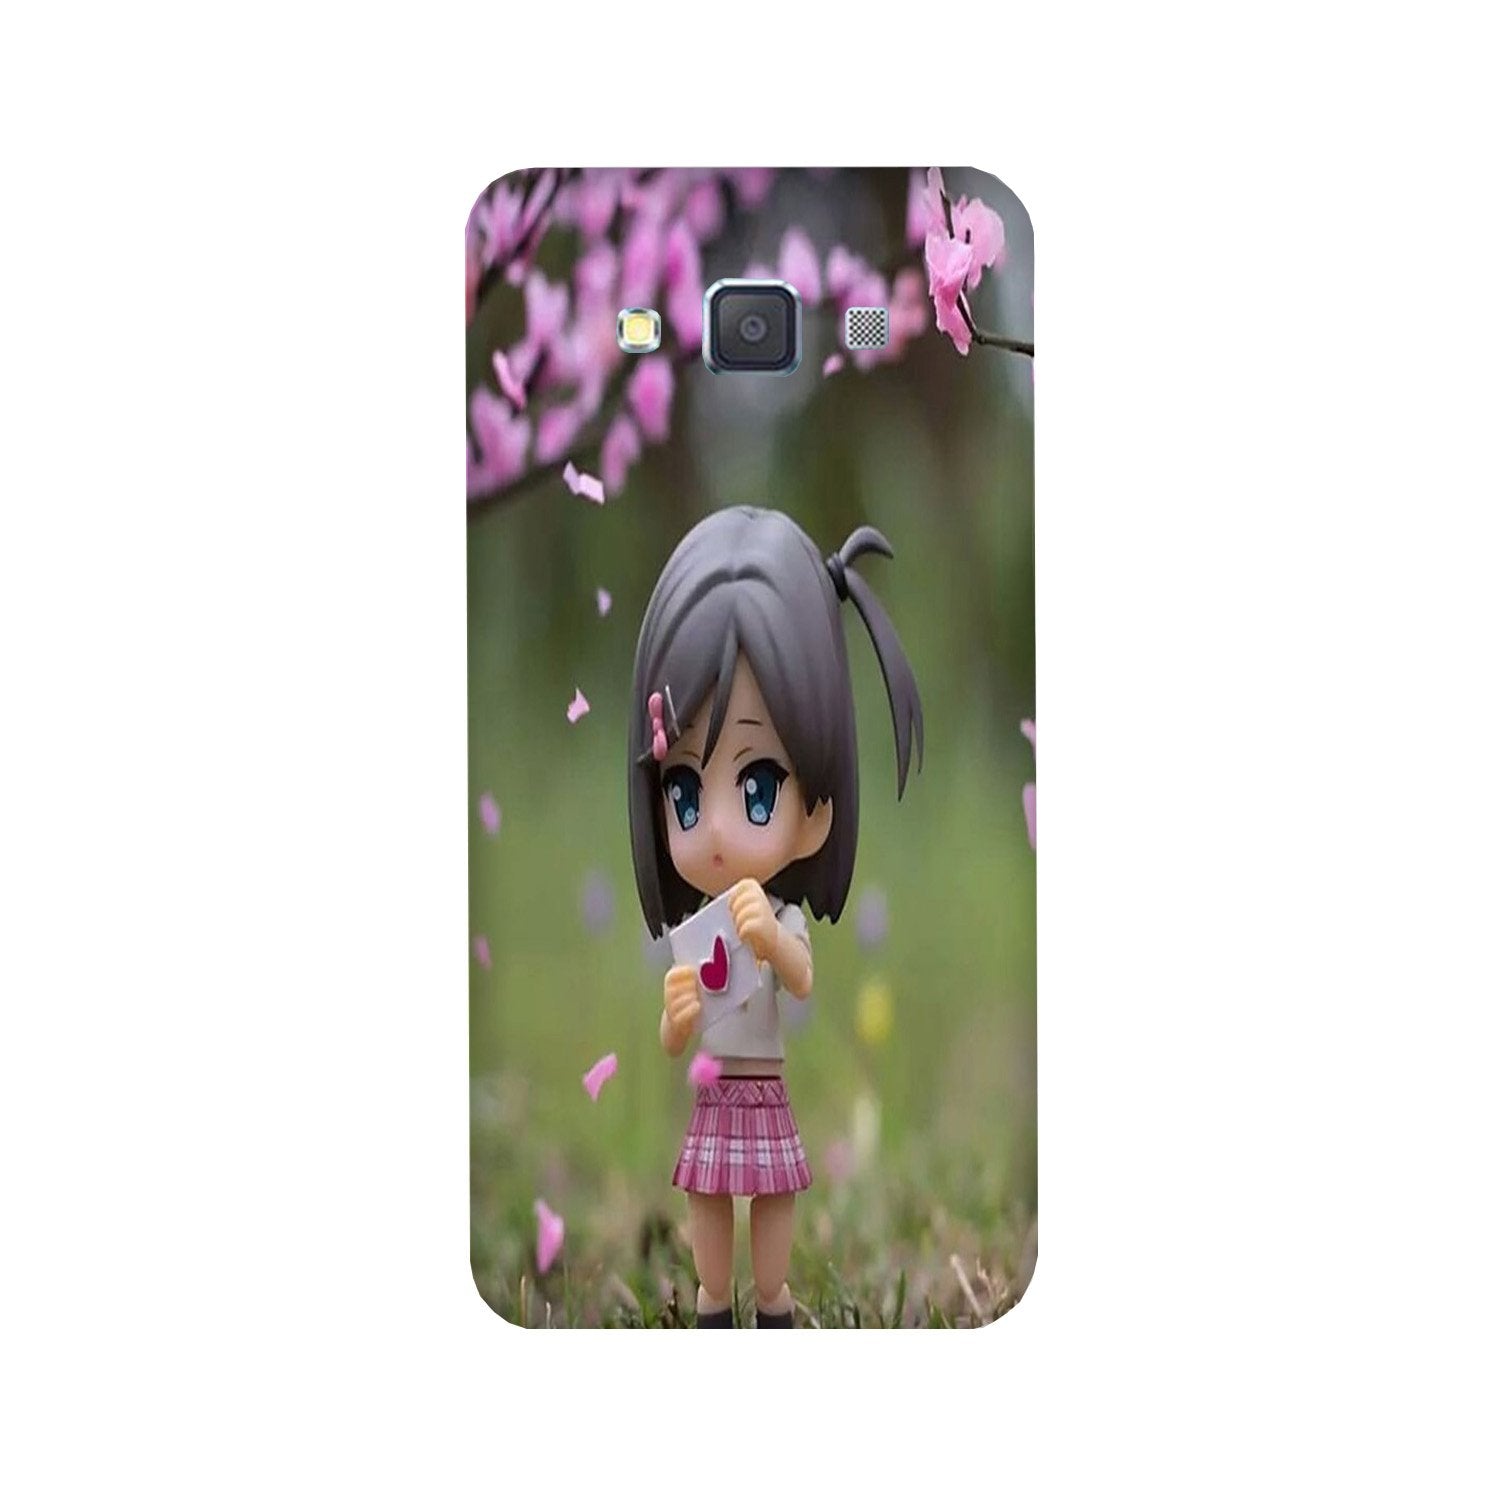 Cute Girl Case for Galaxy ON7/ON7 Pro